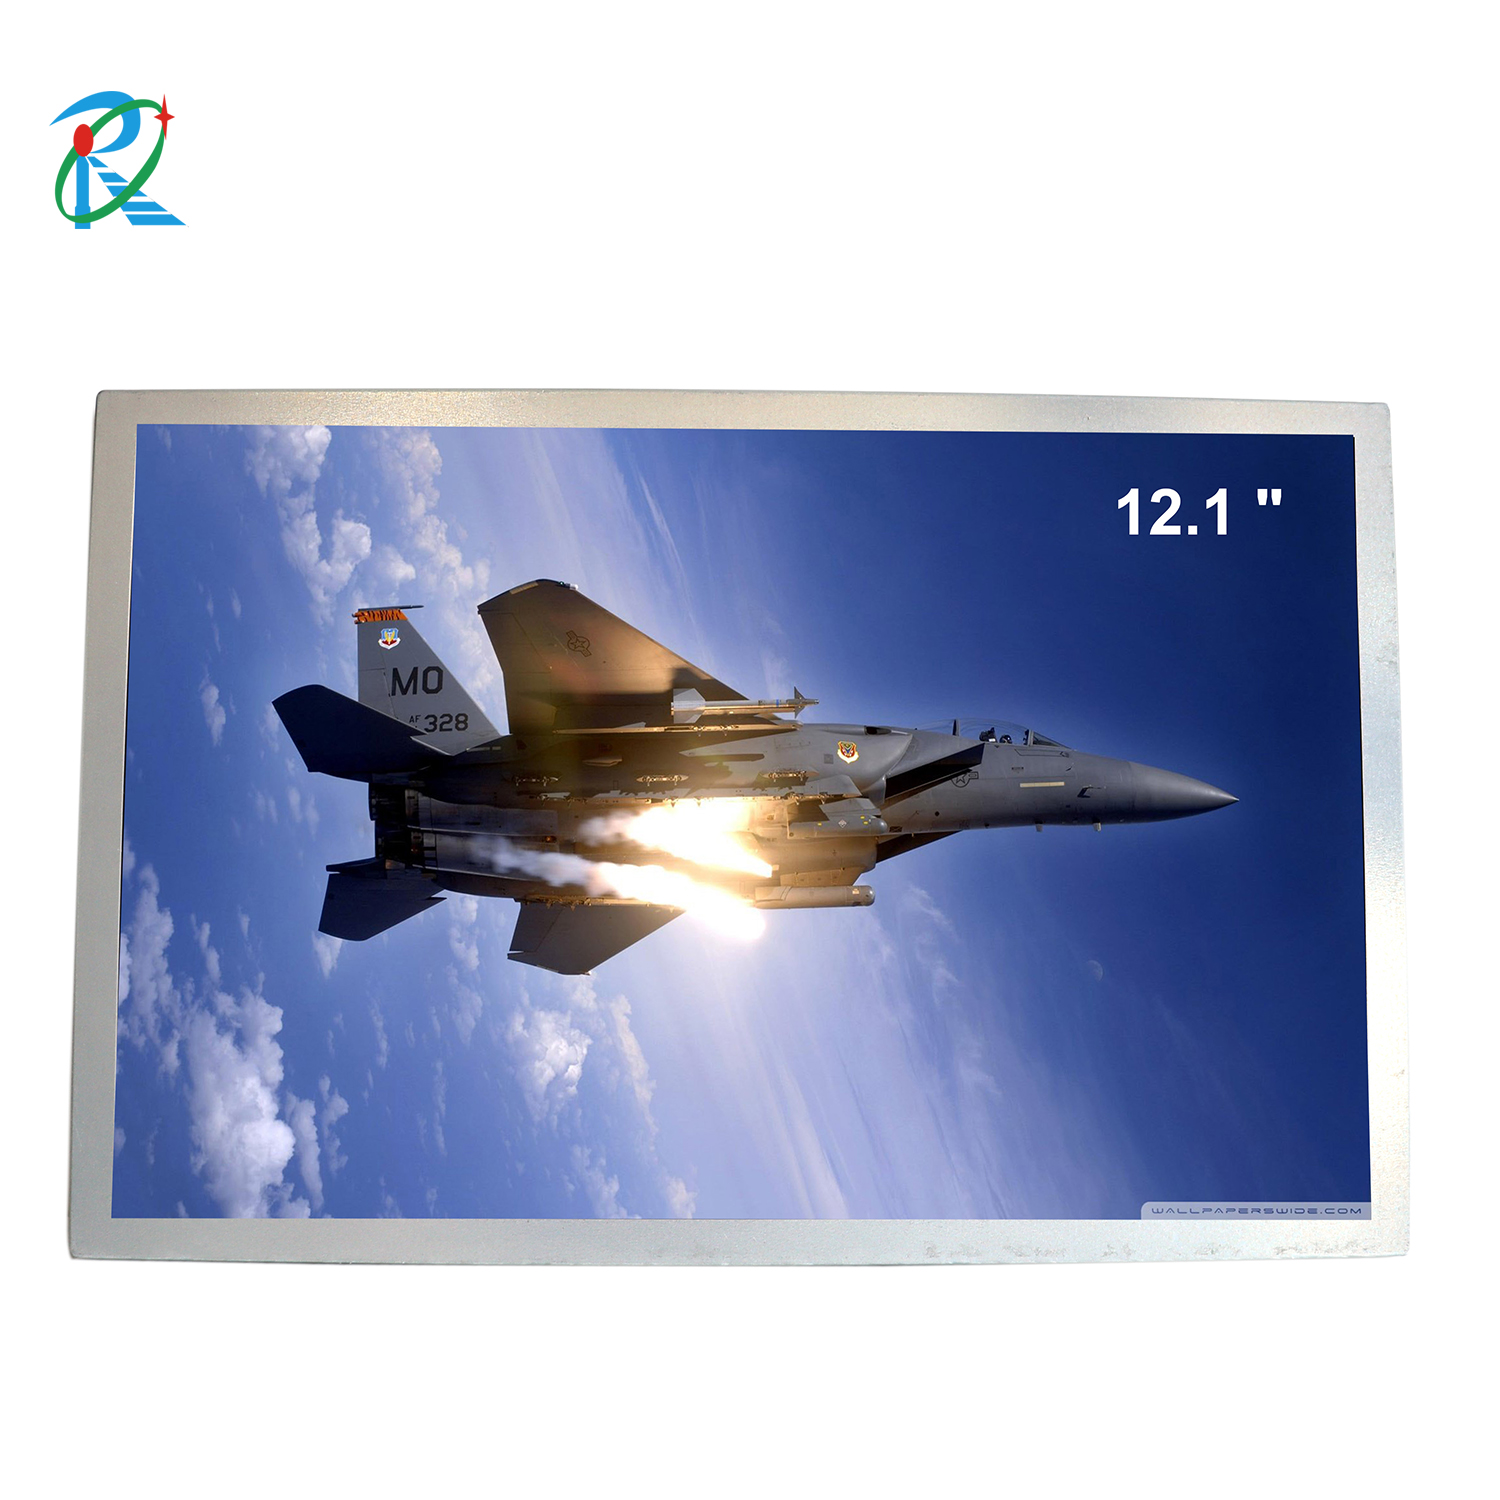  Panel Size 12.1 in. Panel Type A-SI TFT-LCD, LCD module